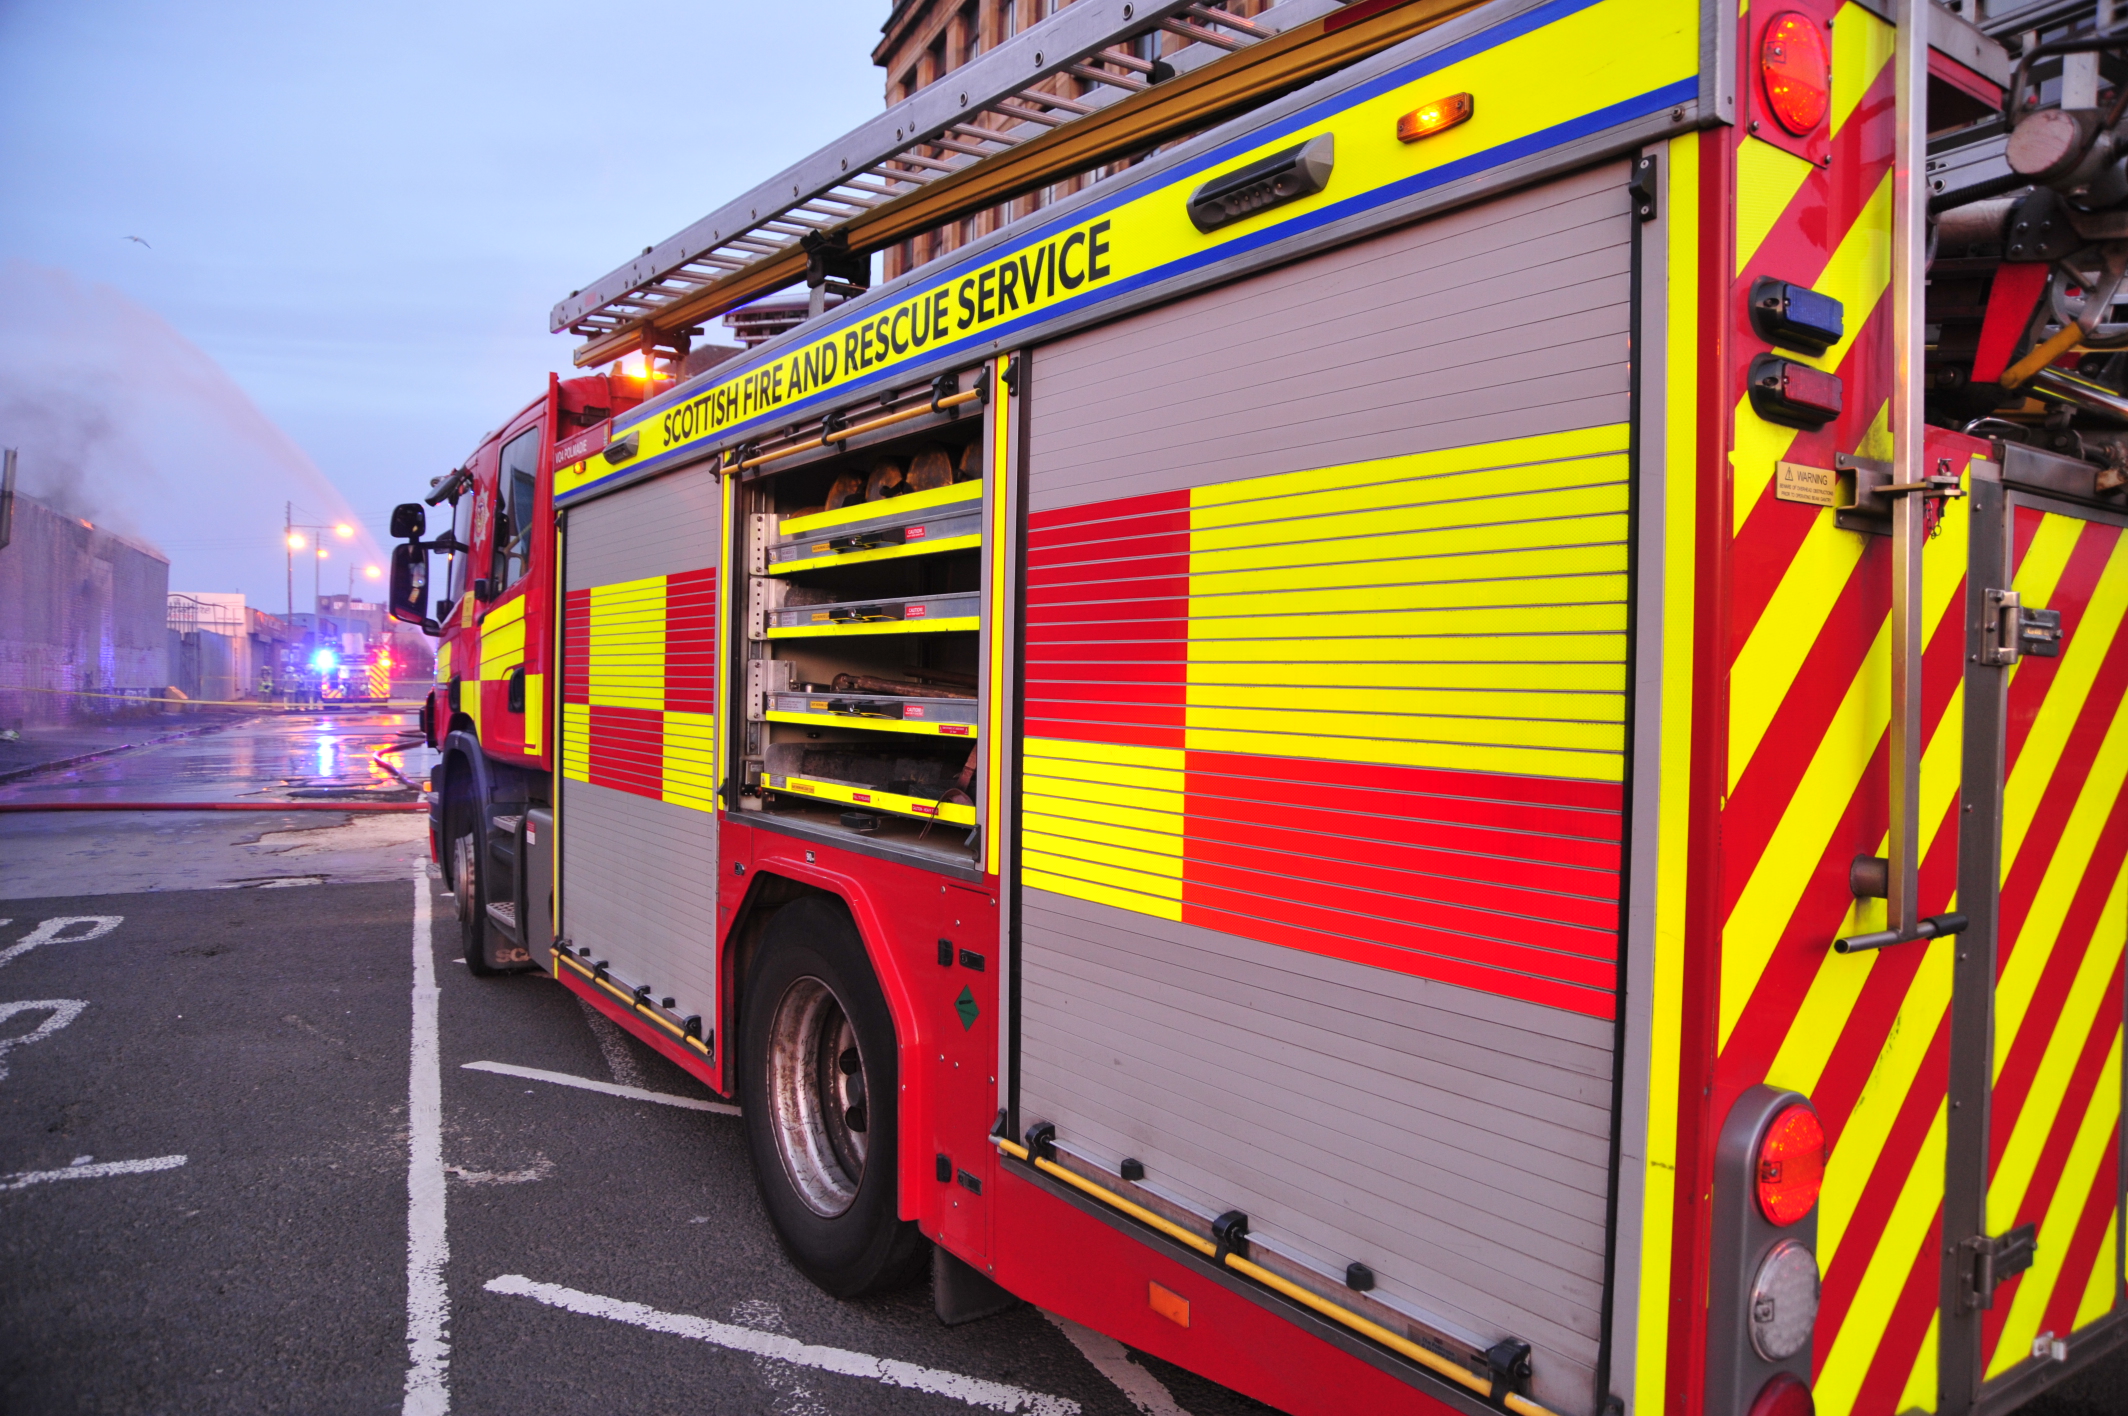 Scottish Fire and Rescue Service received more than 1,800 call-outs to deliberate fires in 2017-18.